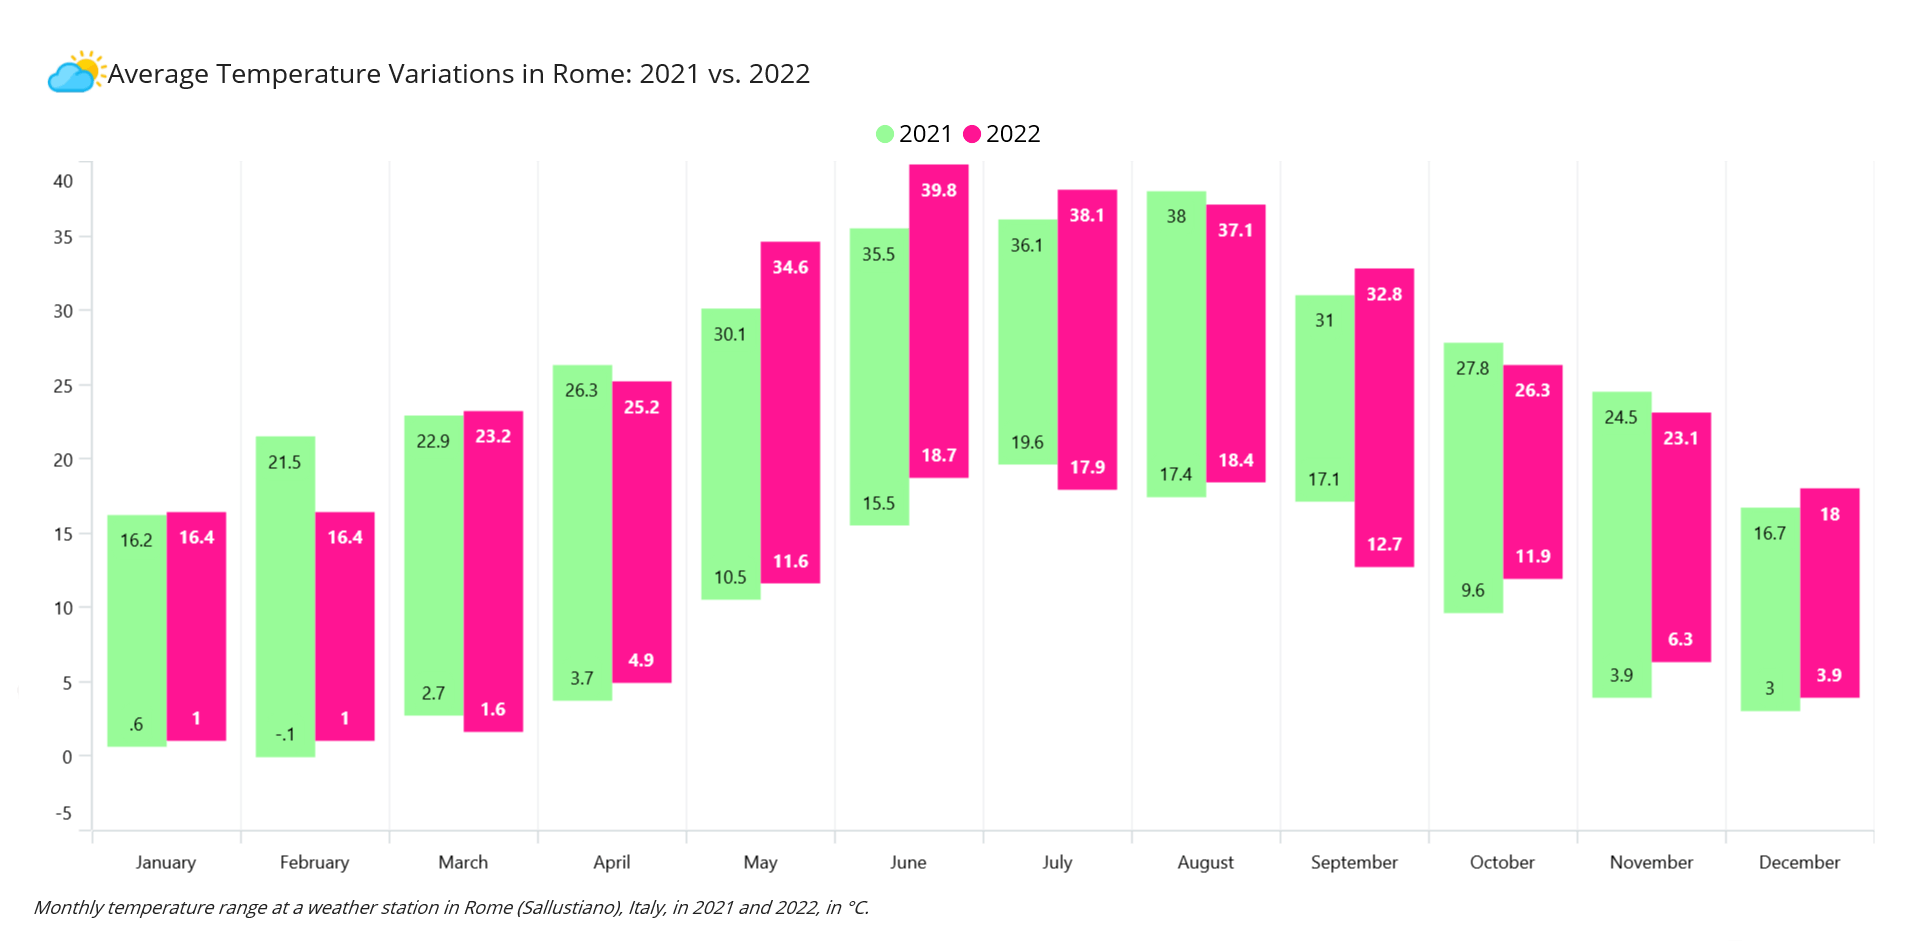 Comparing the Monthly Average Temperature Variations in Rome Using a .NET MAUI Range Column Chart